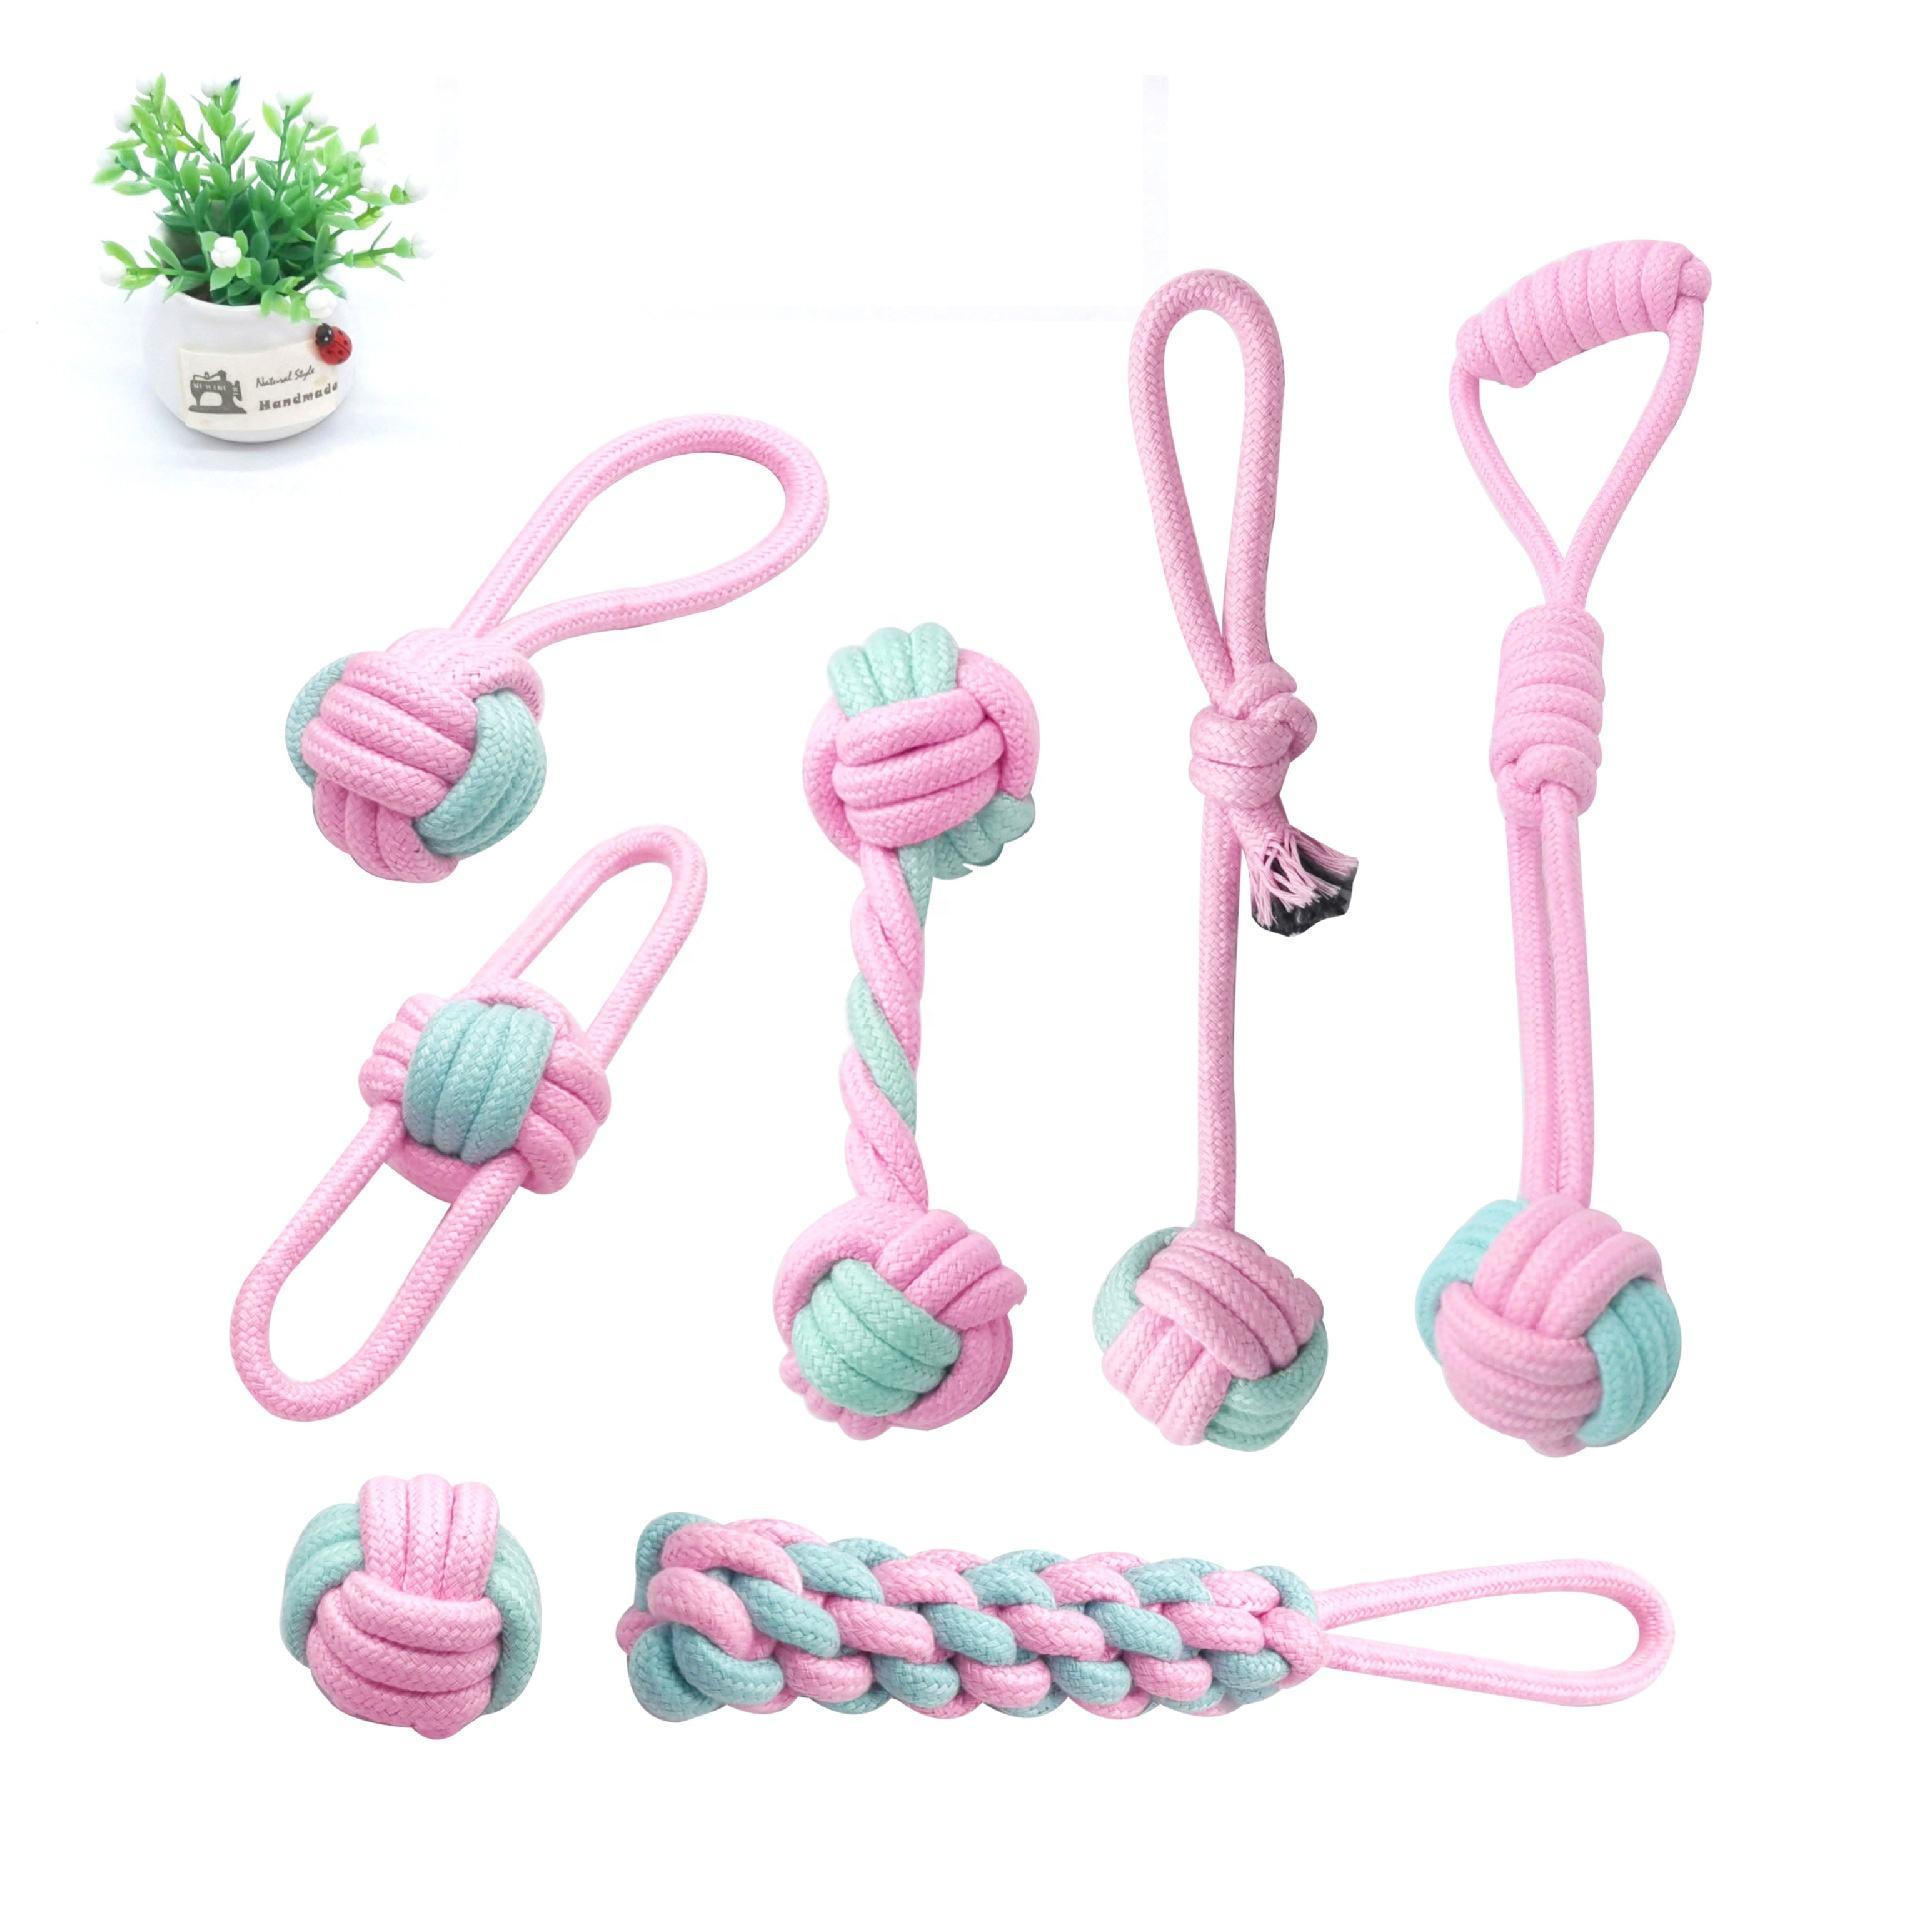 Wholesale Custom Soft Dog Cotton Rope Toy 18 Pack Pet Cat Dog Chew Toy Set For Teeth Cleaning